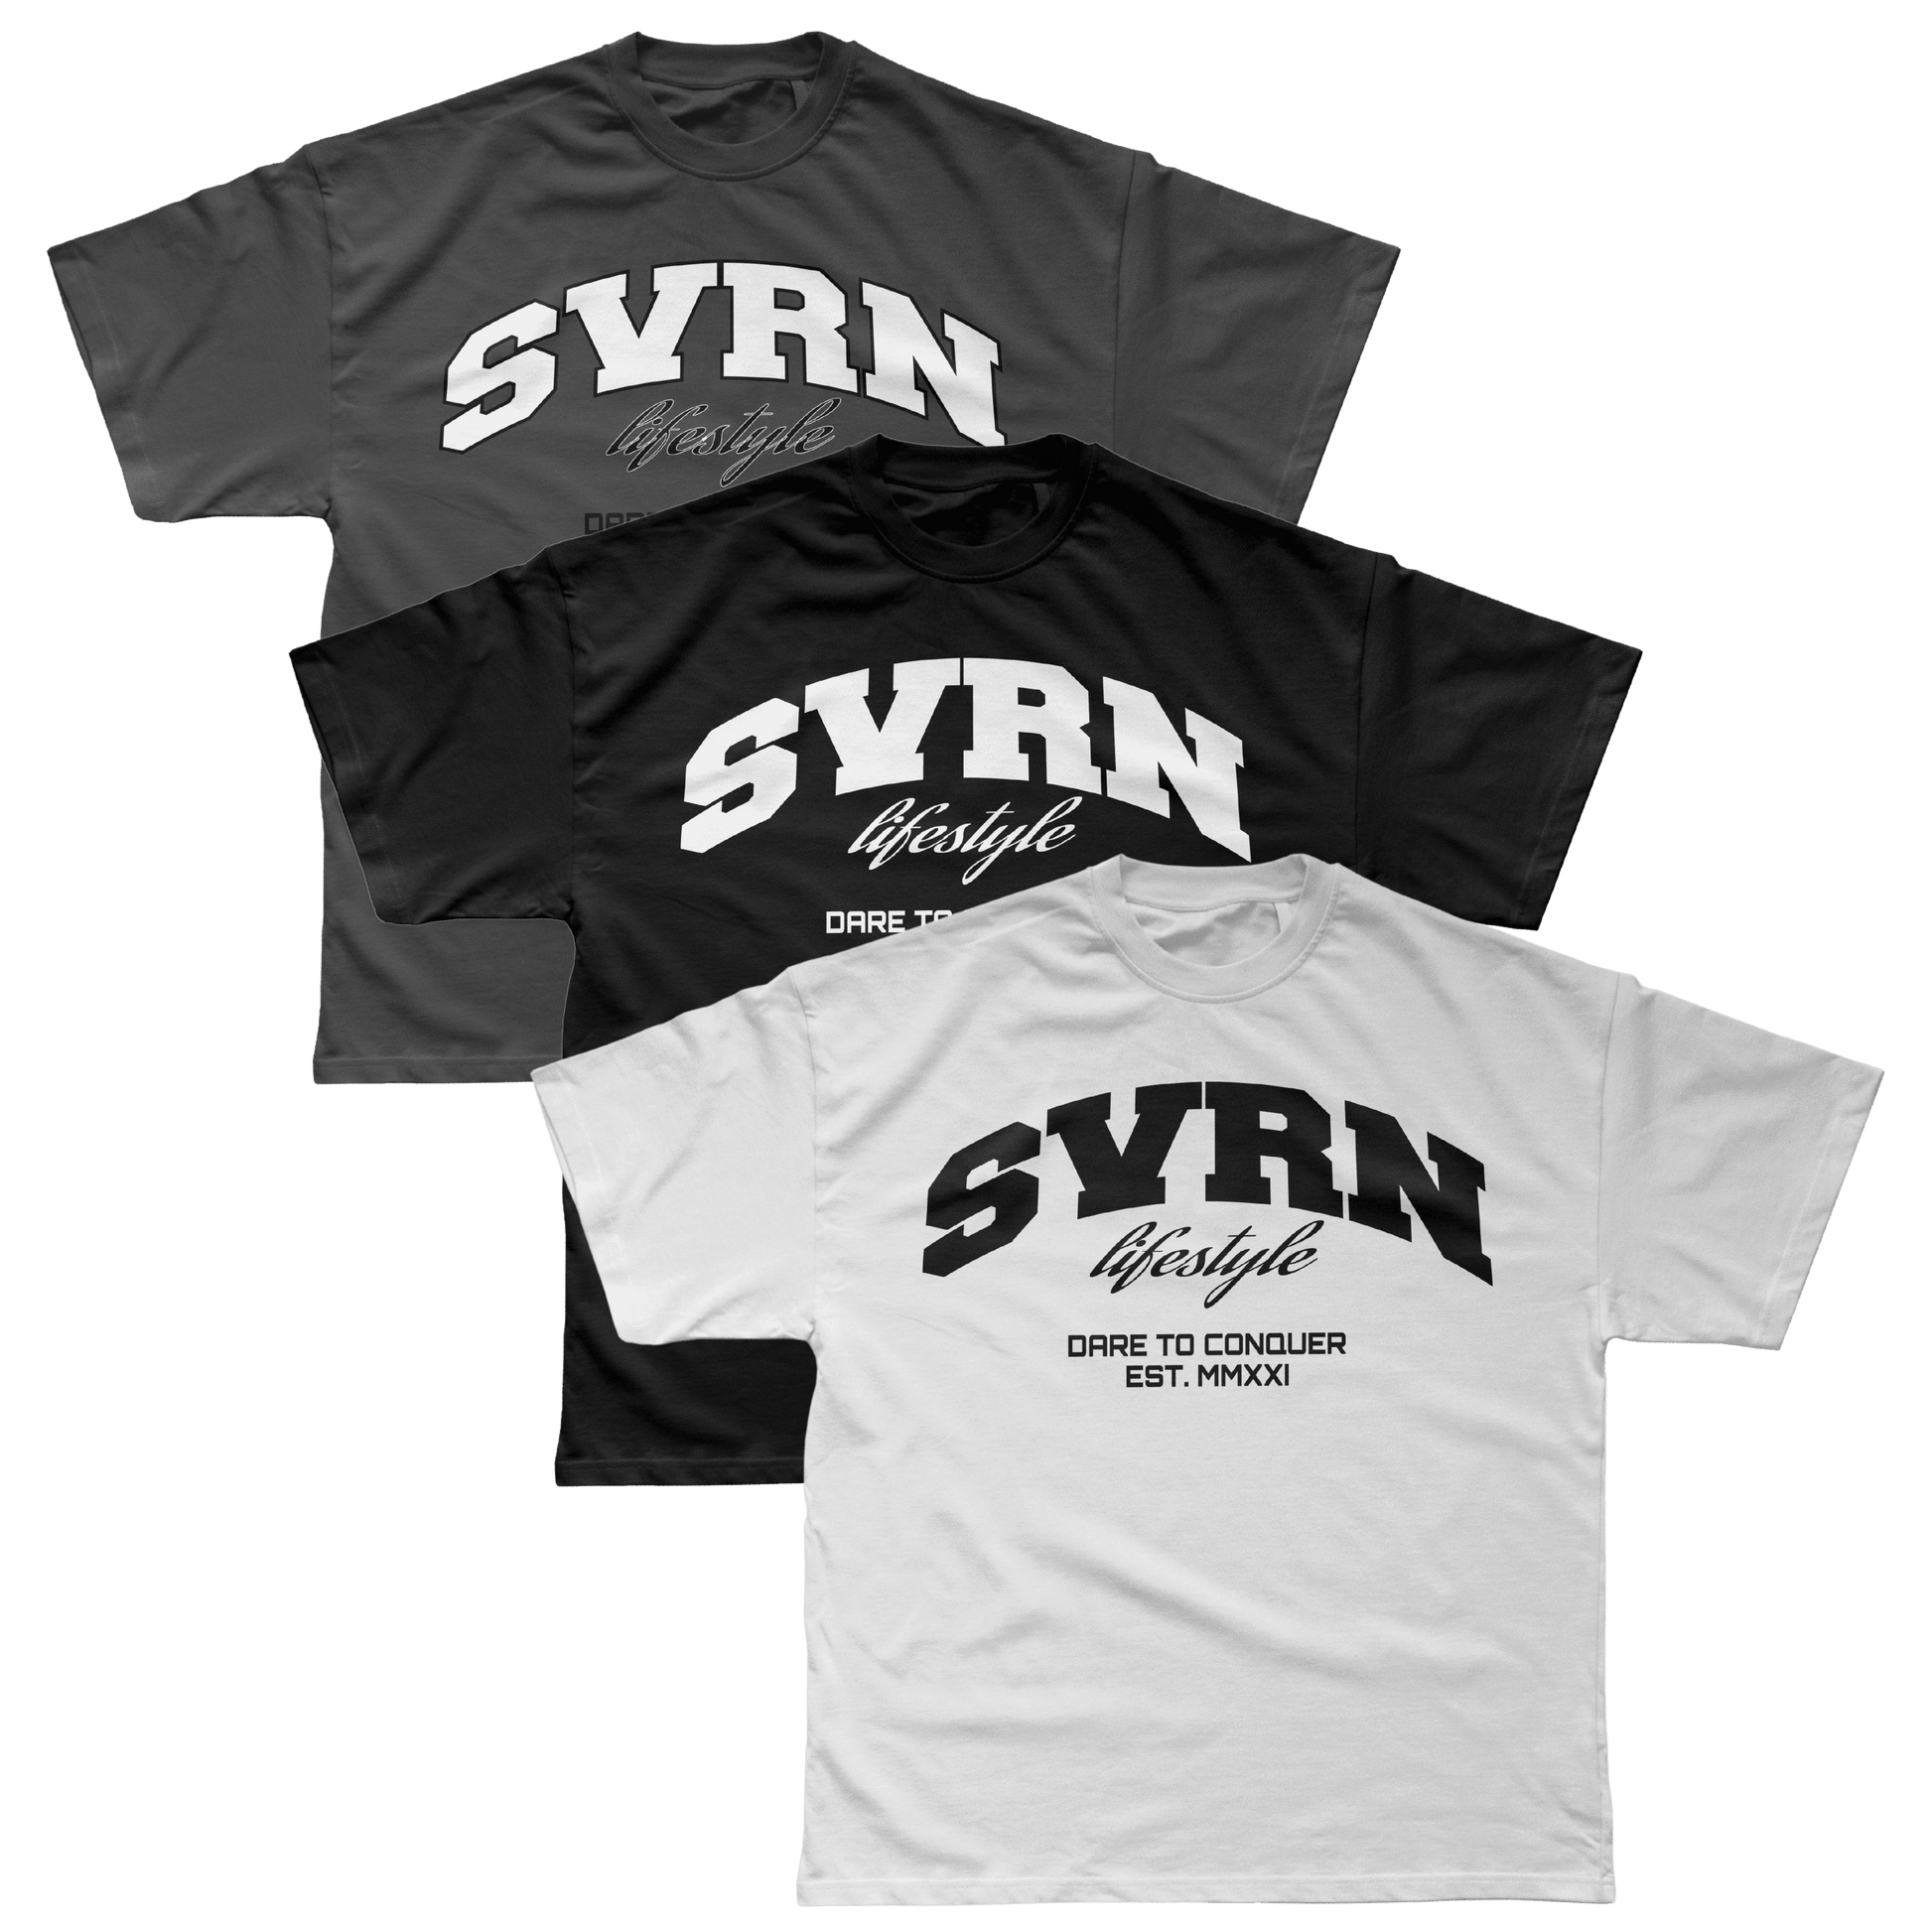 gym tees, gym tshirt, gym t shirts, cool gym shirt, gym clothing brand, sovereign, sovereign shirt, sovereign lifestyle, dare to conquer